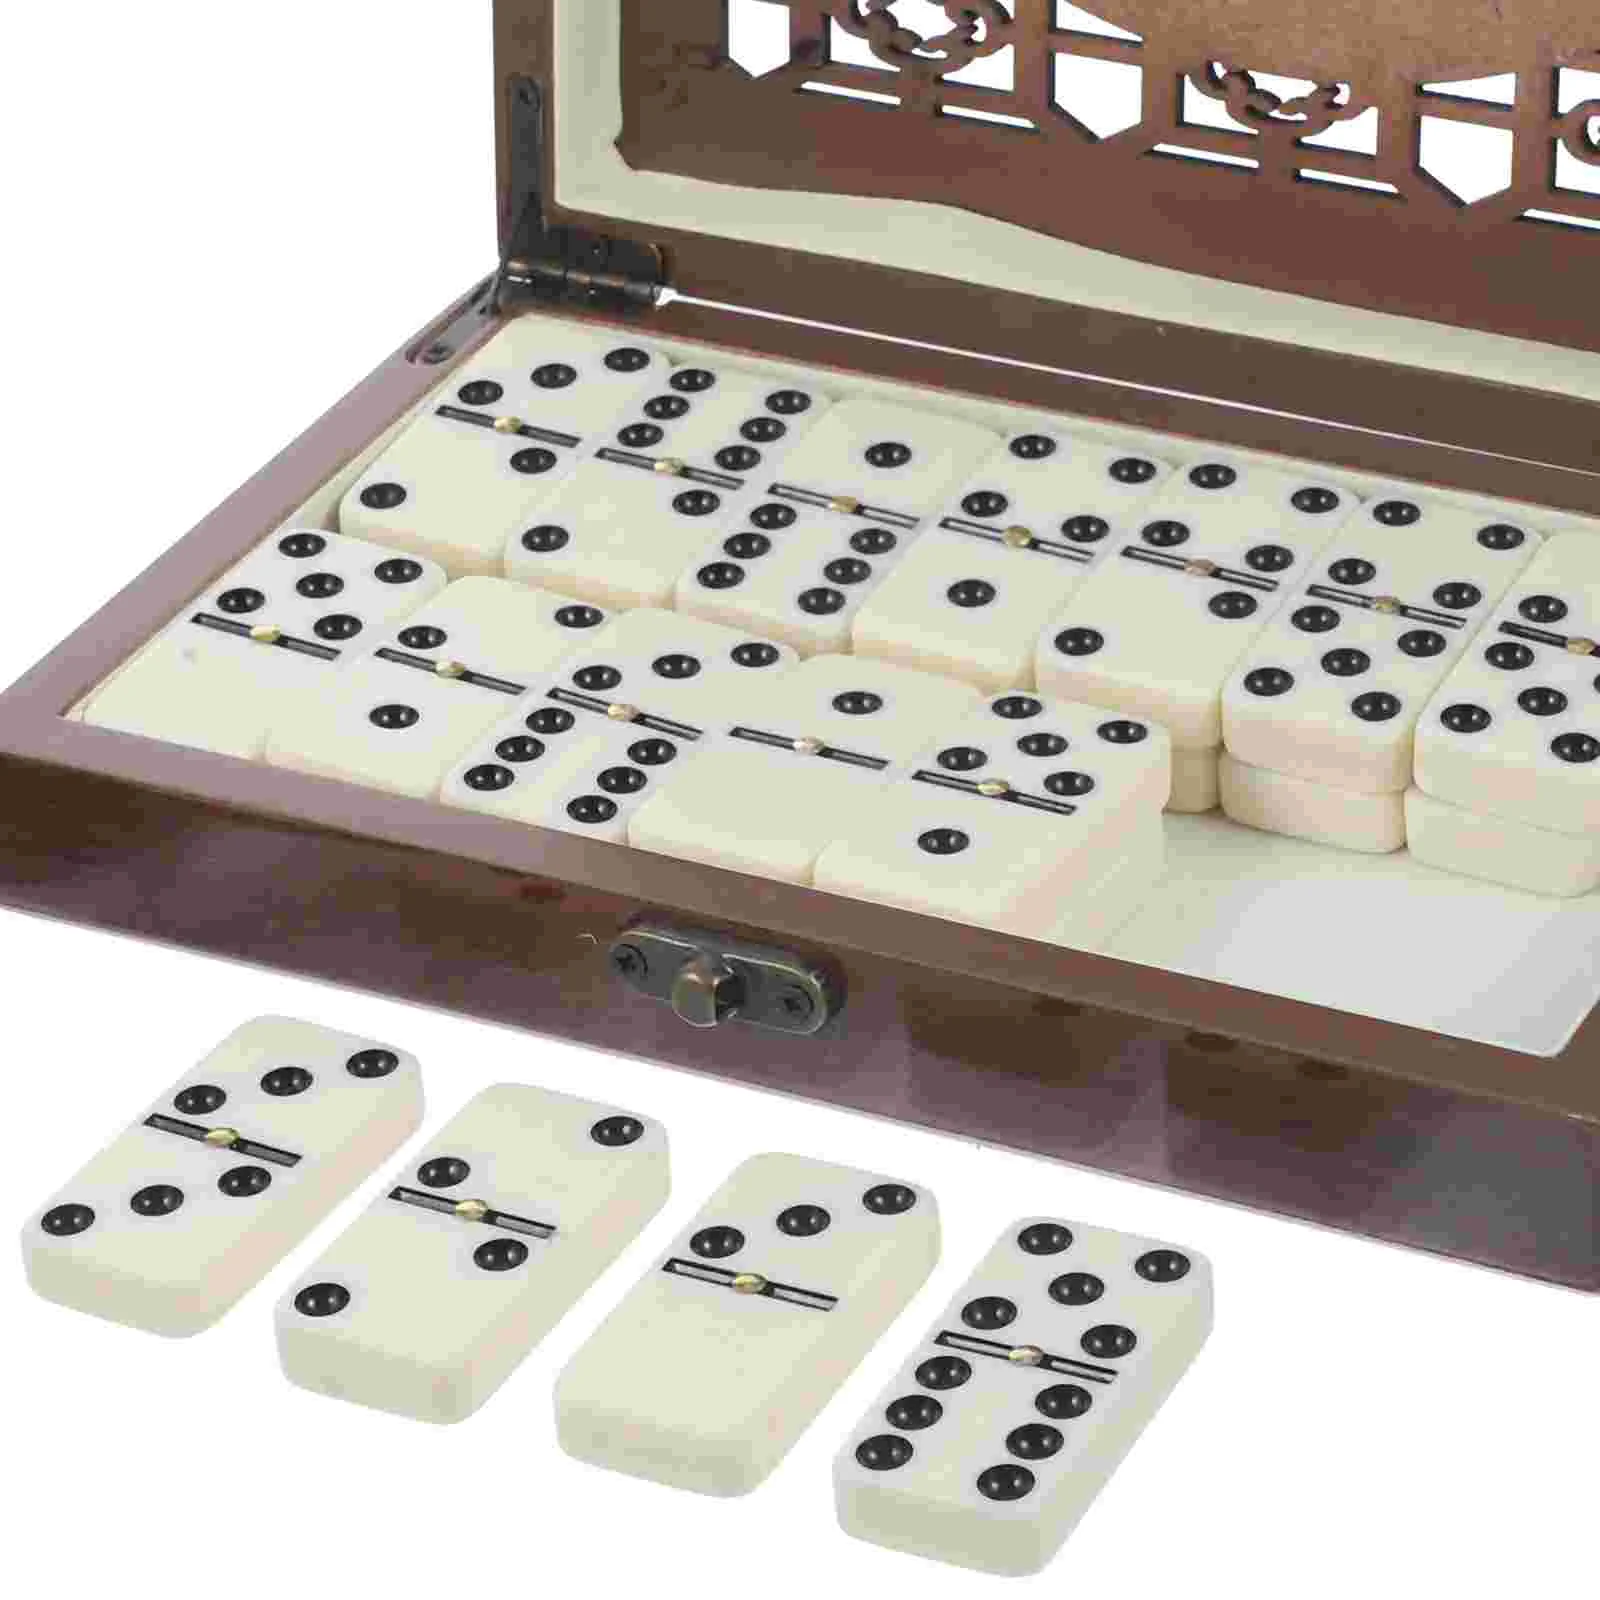 

Dominoes Domino Set Game Blocks Toy Wooden Block Kids Tiles Adults Stacking Box Dominos Building Travel Entertainment Double